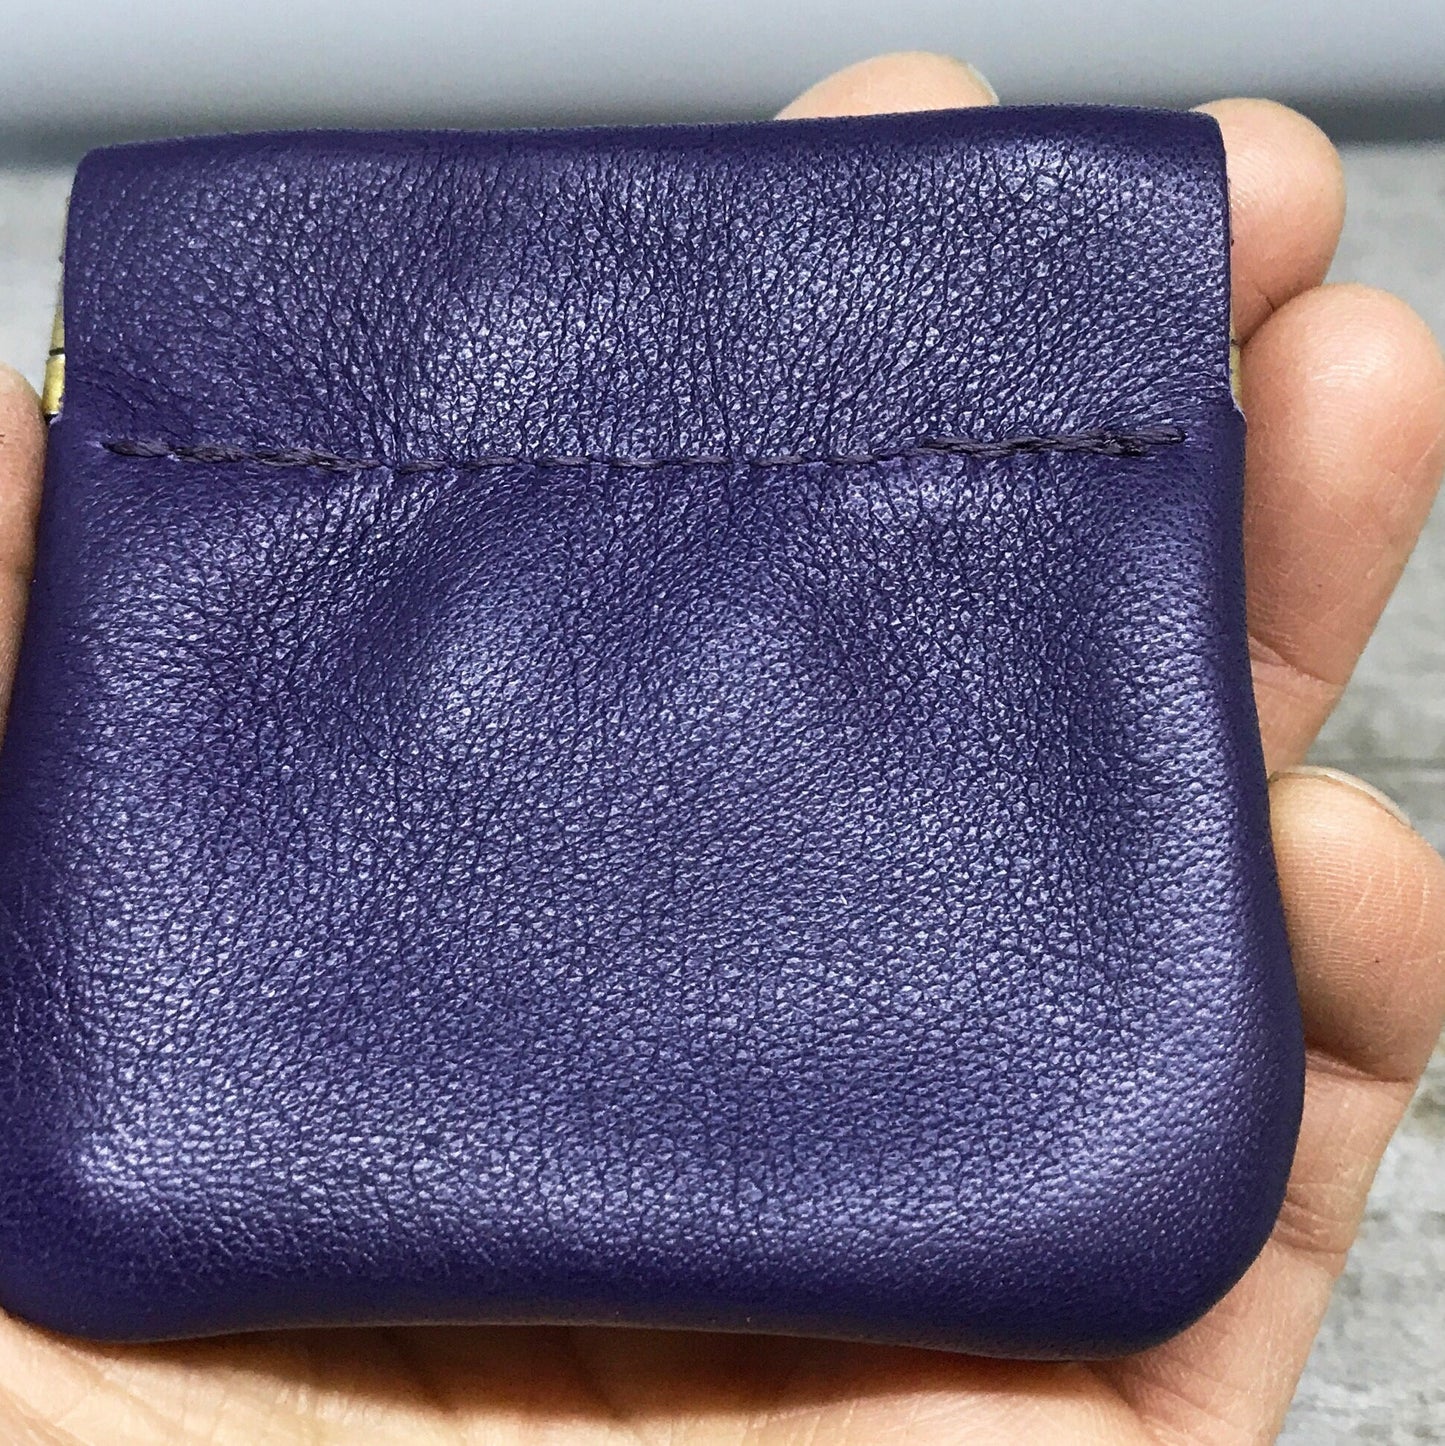 Small Leather Squeeze Coin Case